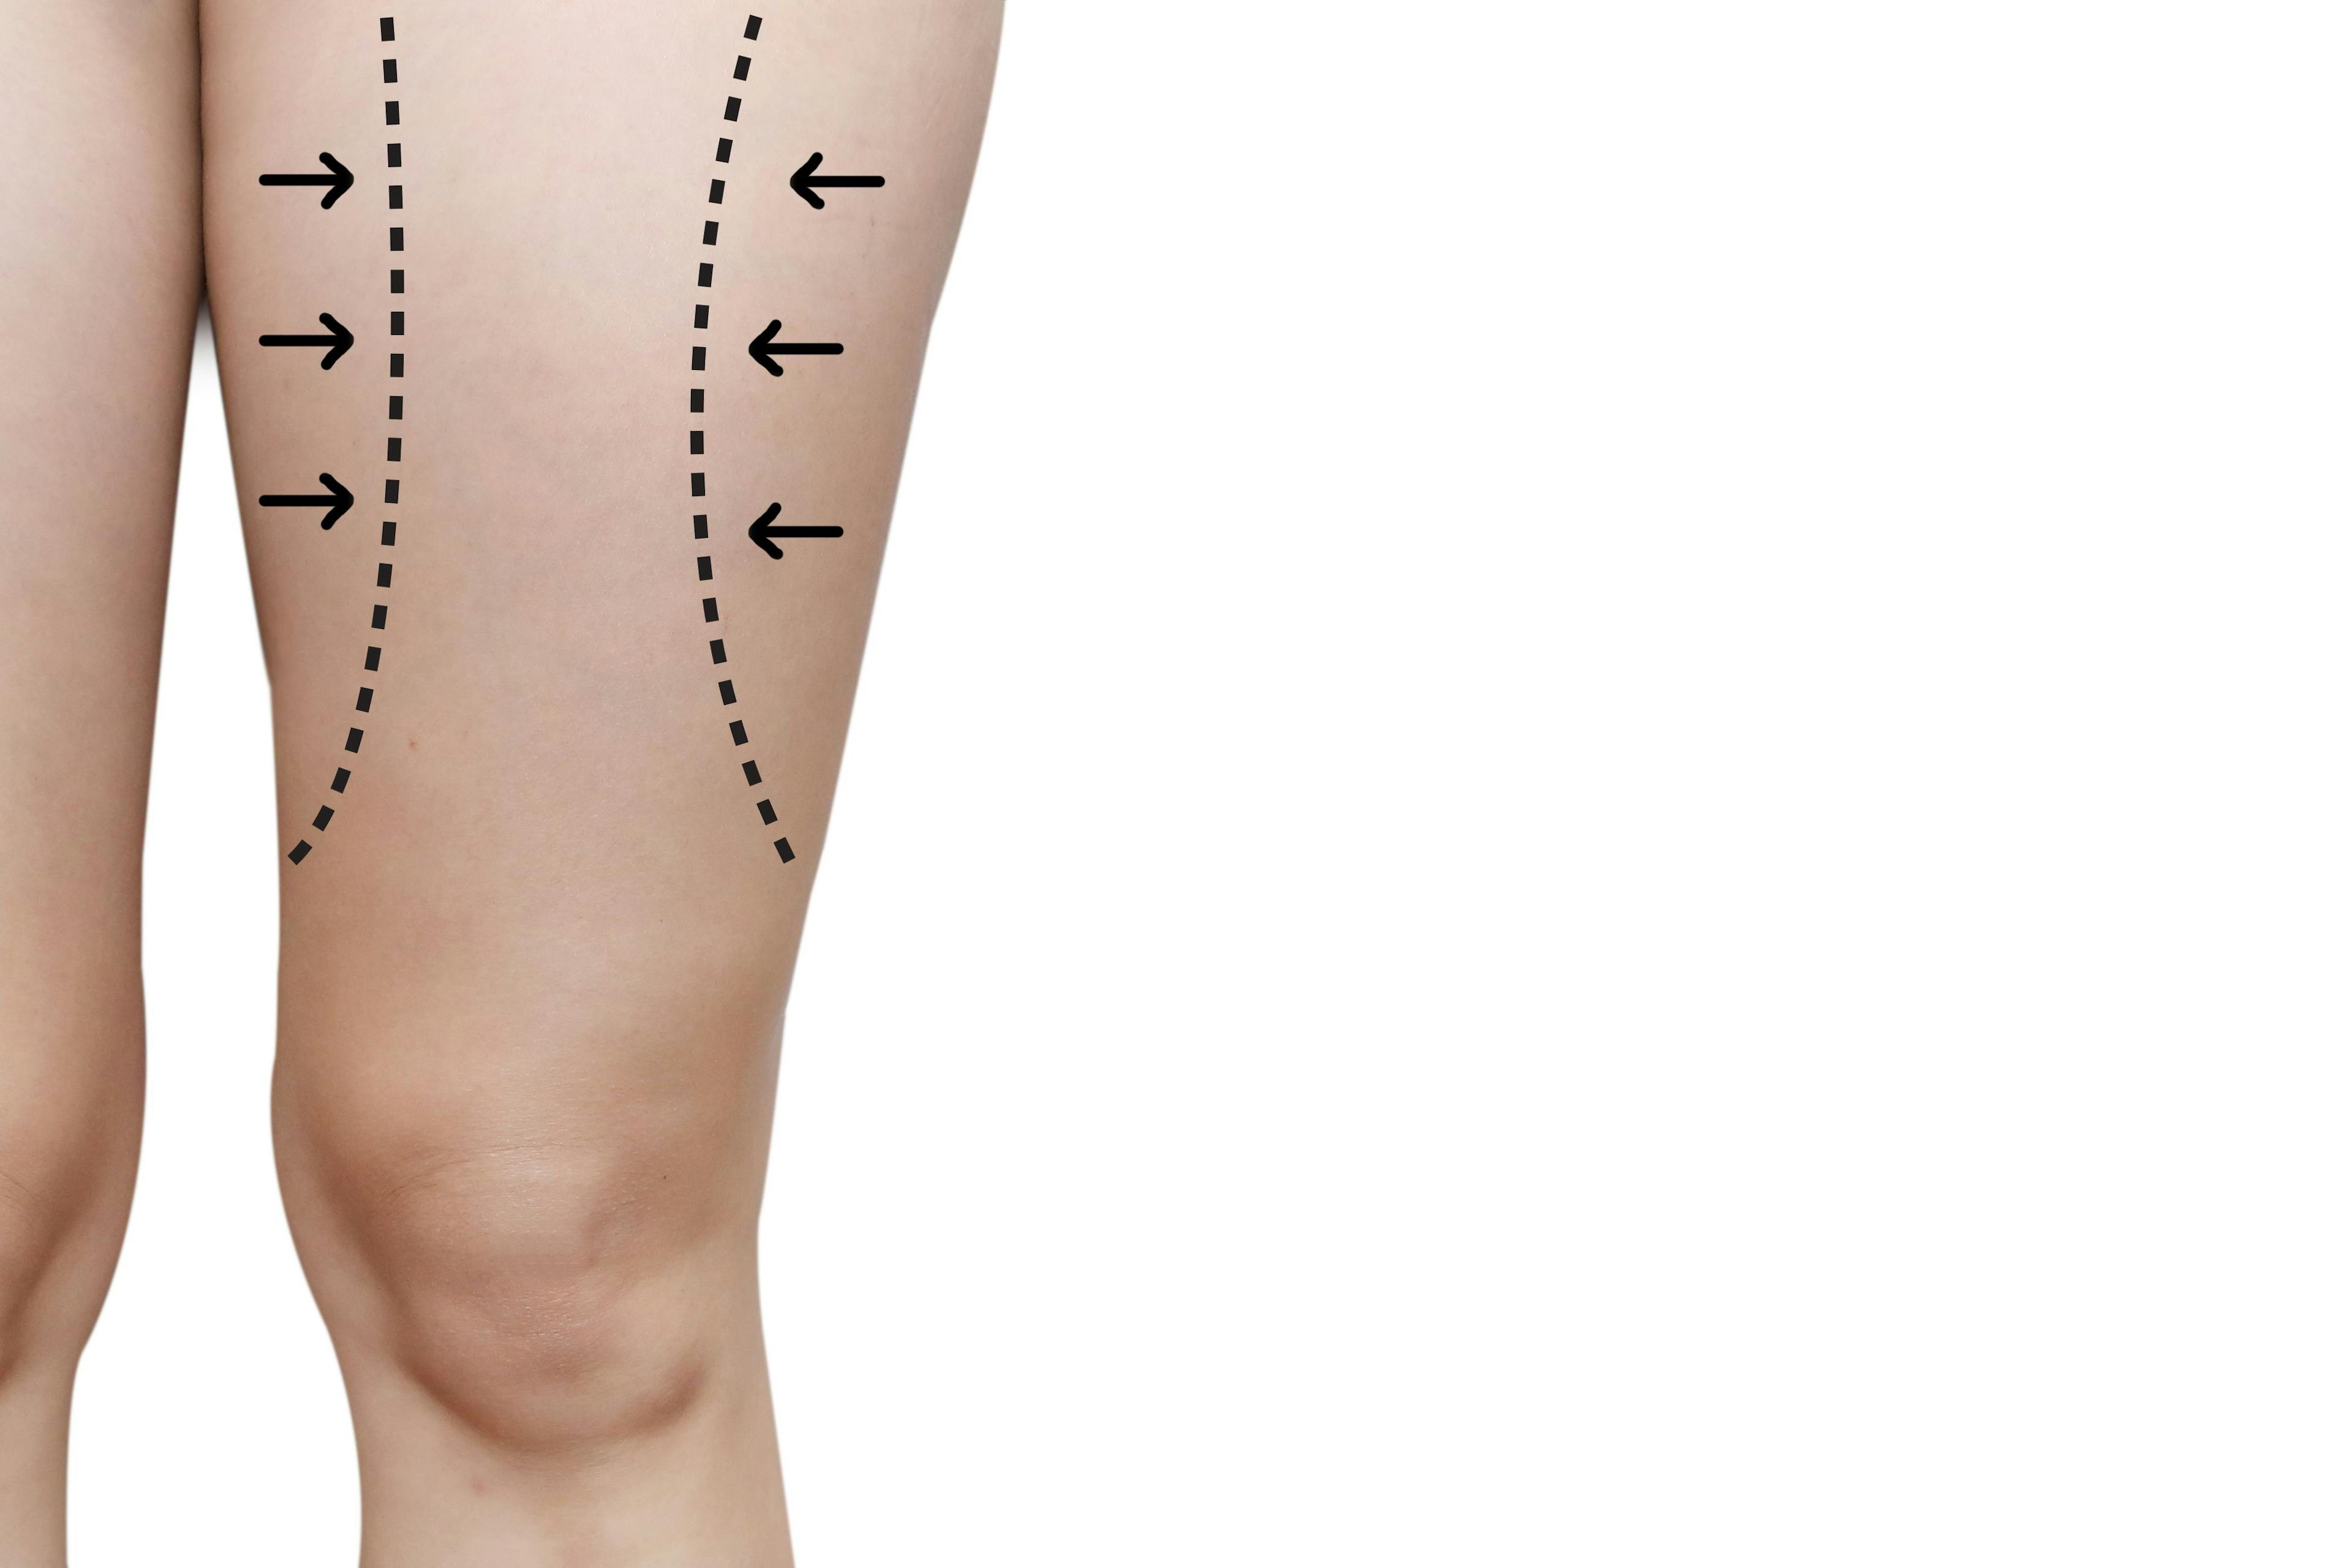 Acoustic Shock Therapy for Cellulite? Maybe. 